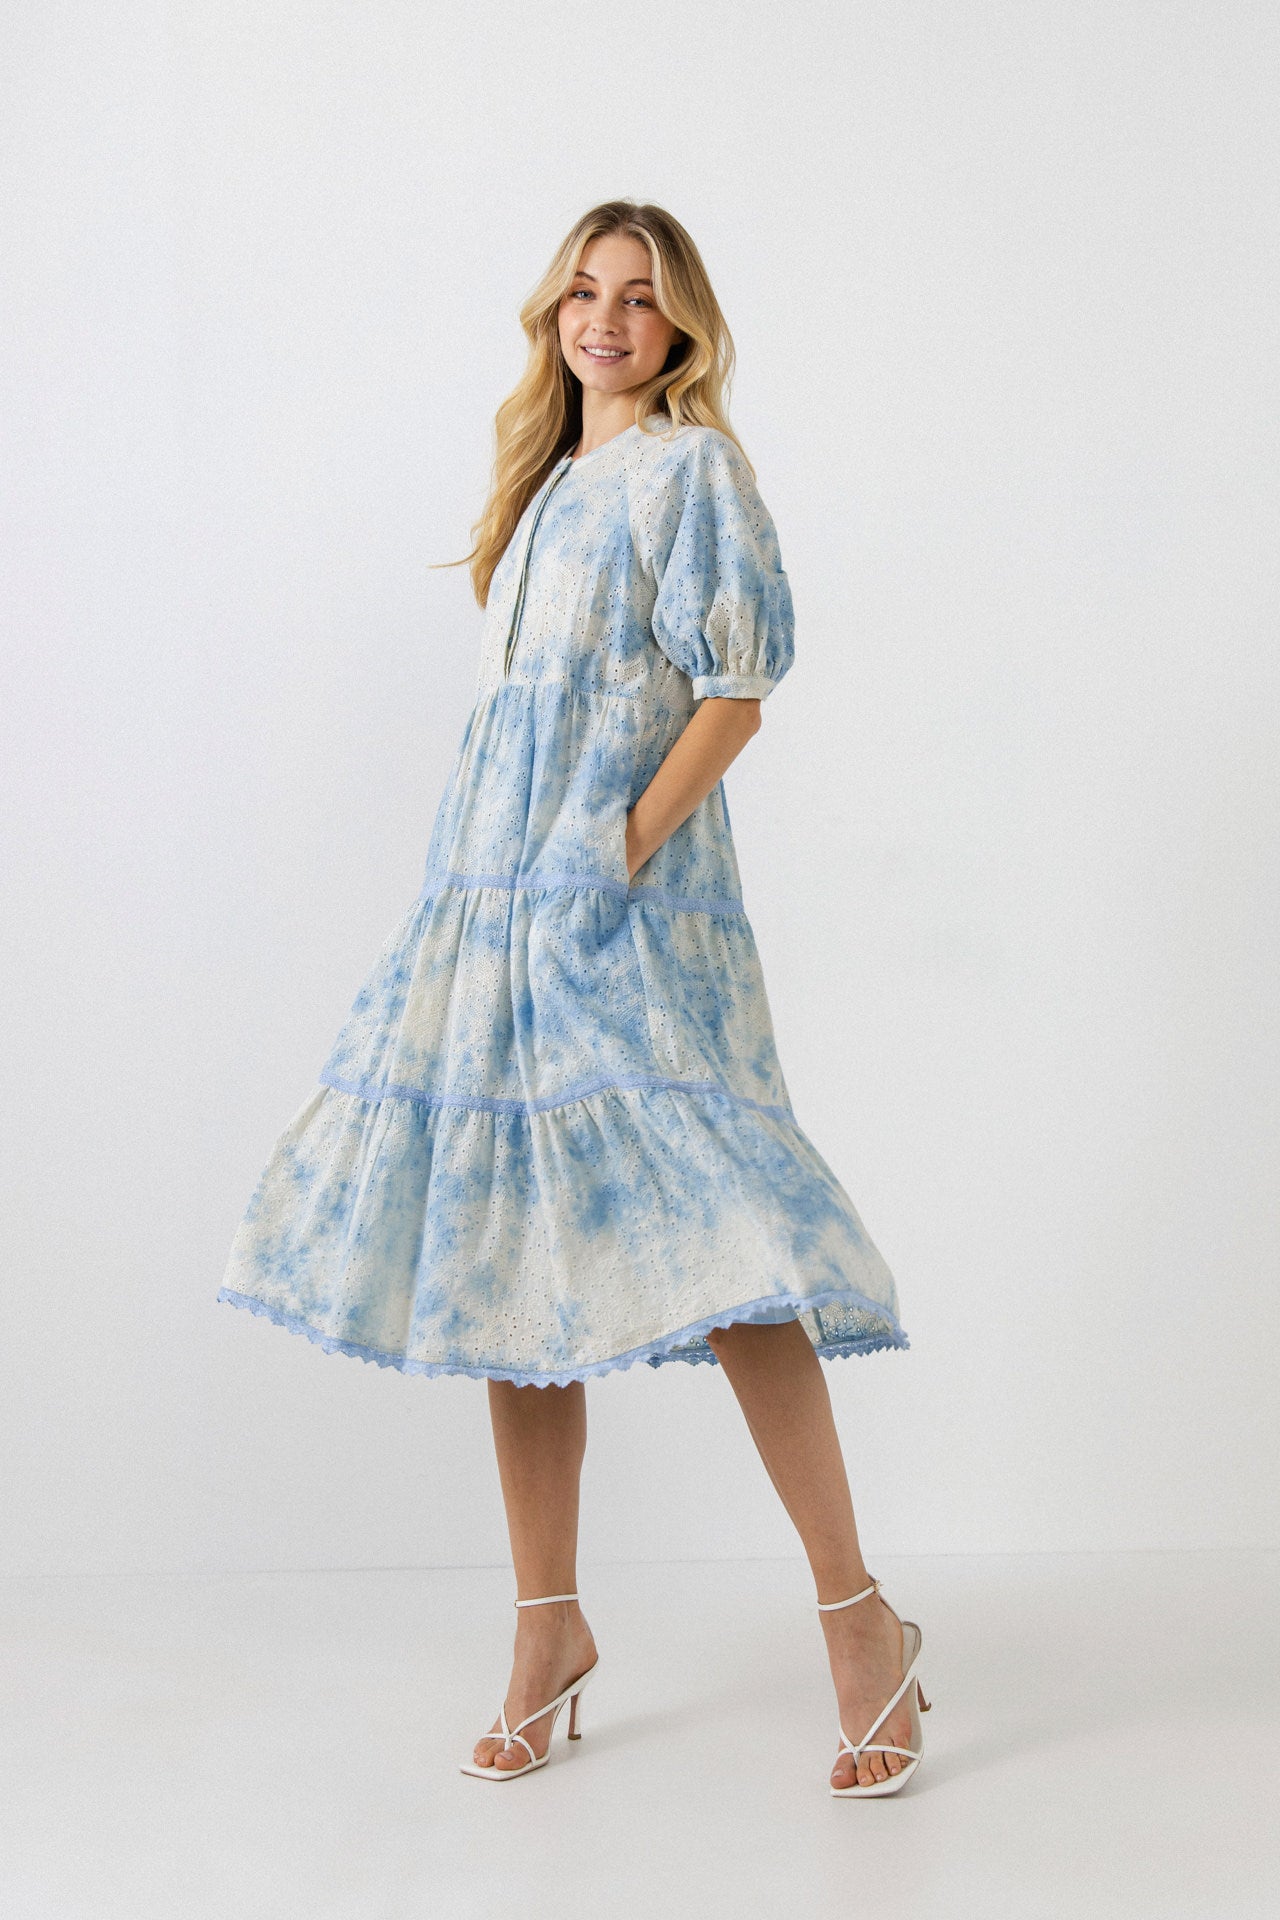 FREE THE ROSES - Paisely Eyelet Midi Dress with Tie-dye Effect - DRESSES available at Objectrare